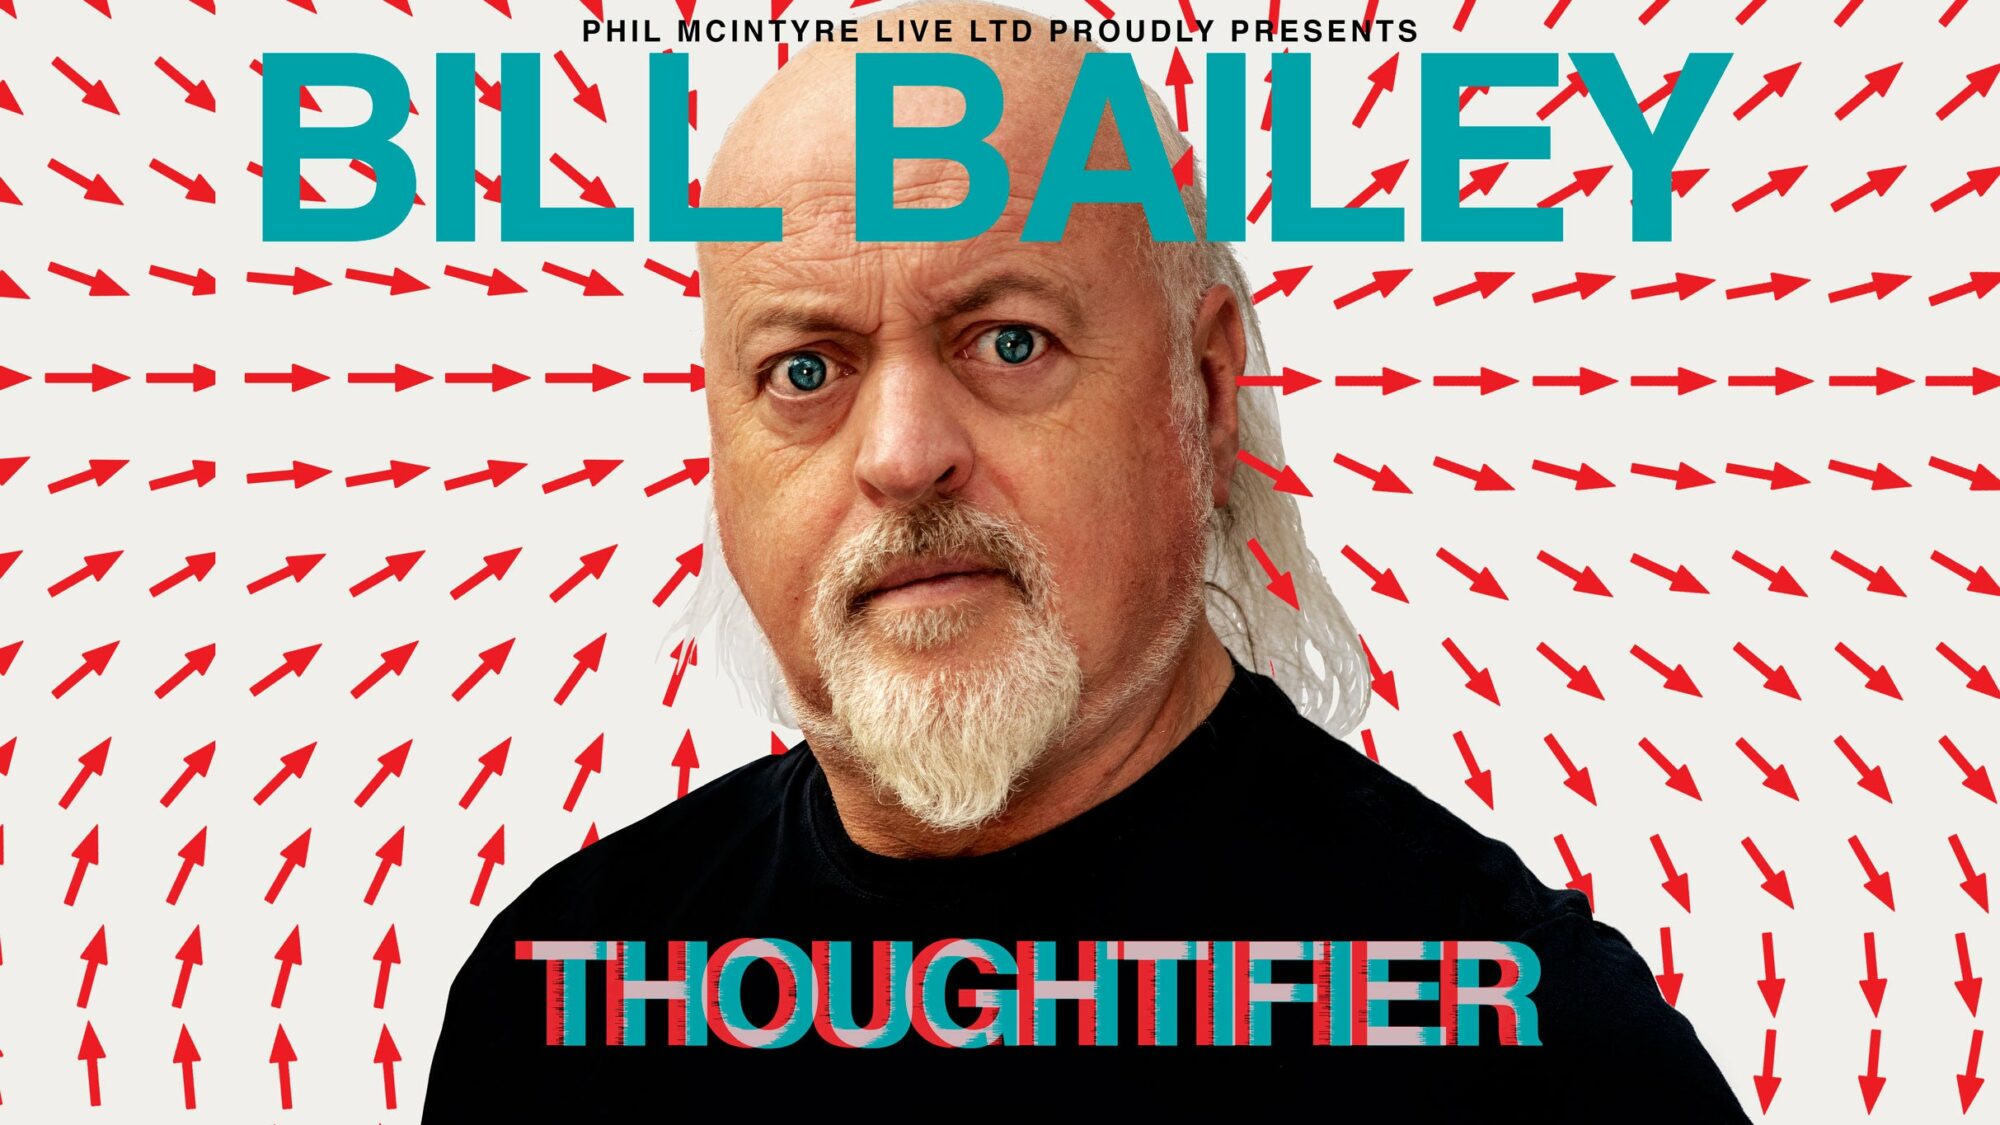 Image name Bill Bailey Thoughtifier at Utilita Arena Sheffield Sheffield the 1 image from the post Bill Bailey: Thoughtifier at First Direct Arena, Leeds in Yorkshire.com.